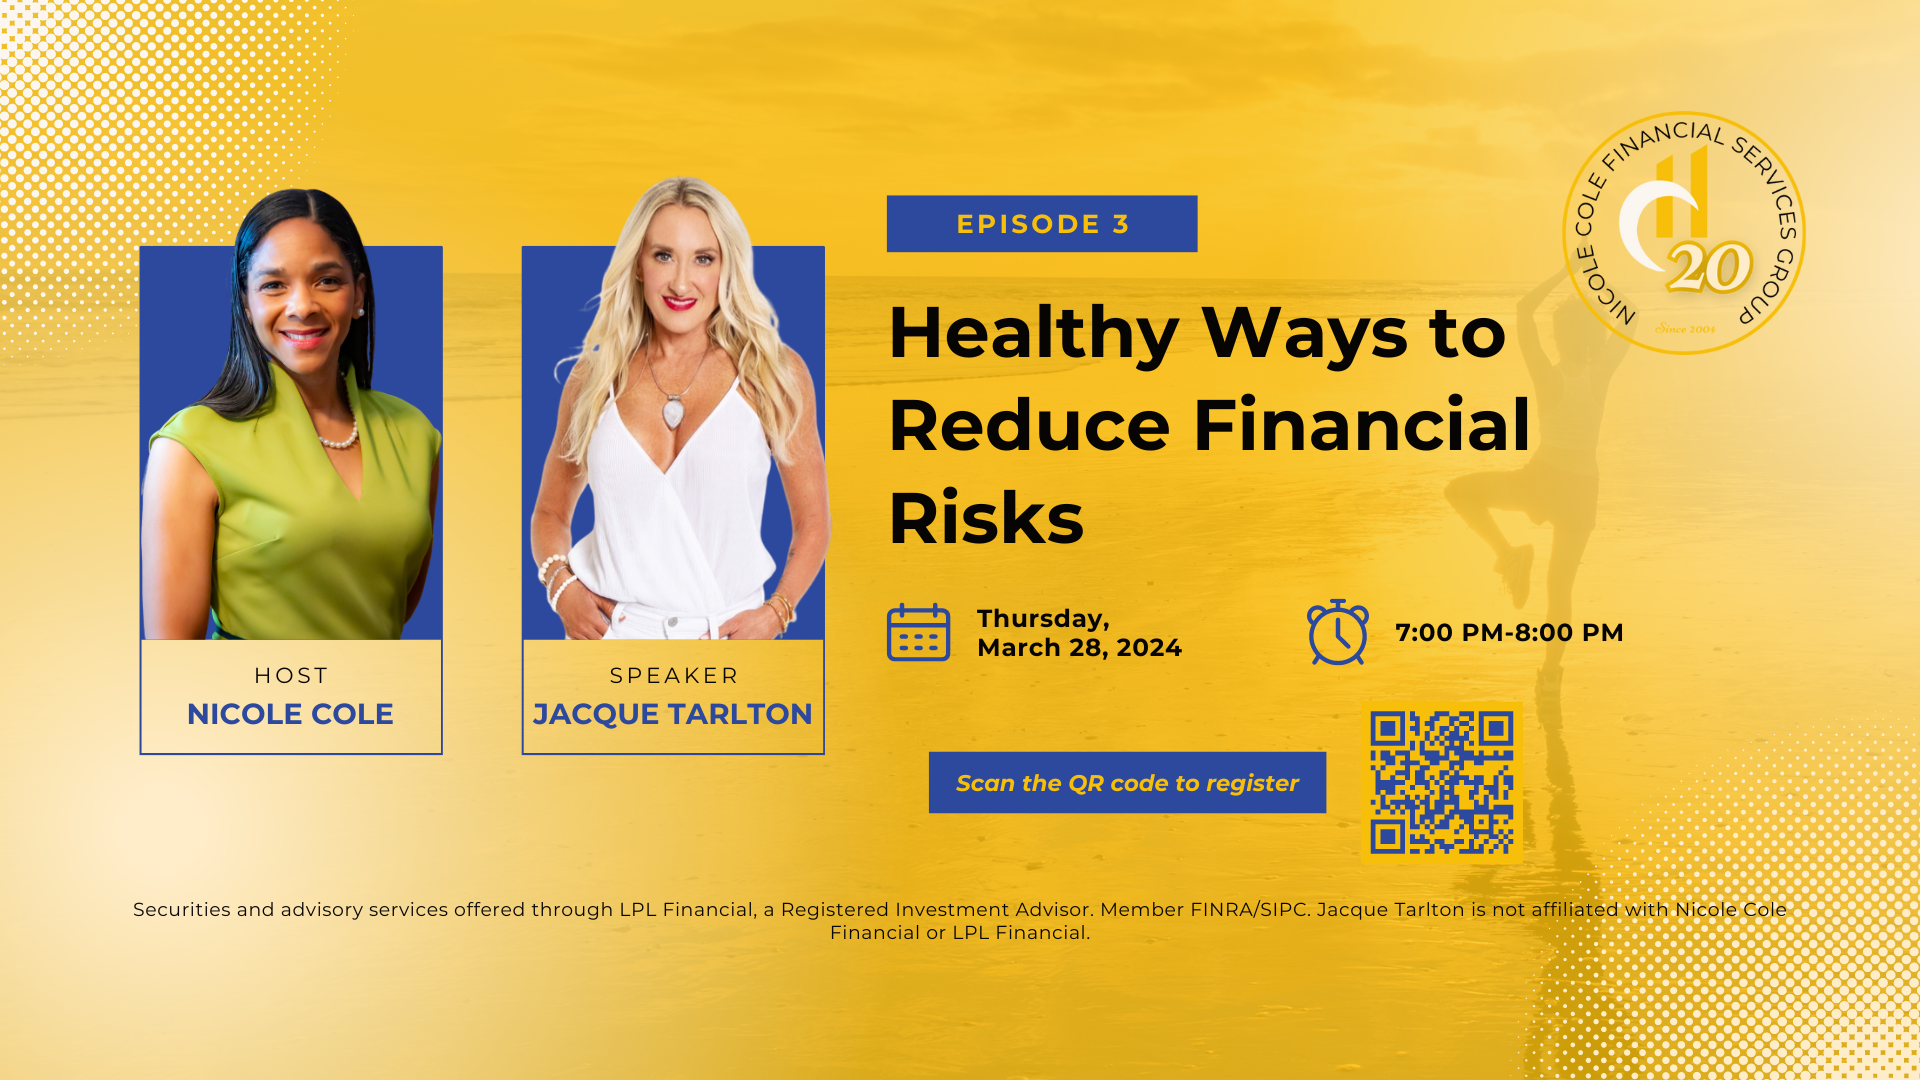 Healthy Ways to Reduce Financial Risks with Jacque Tarlton